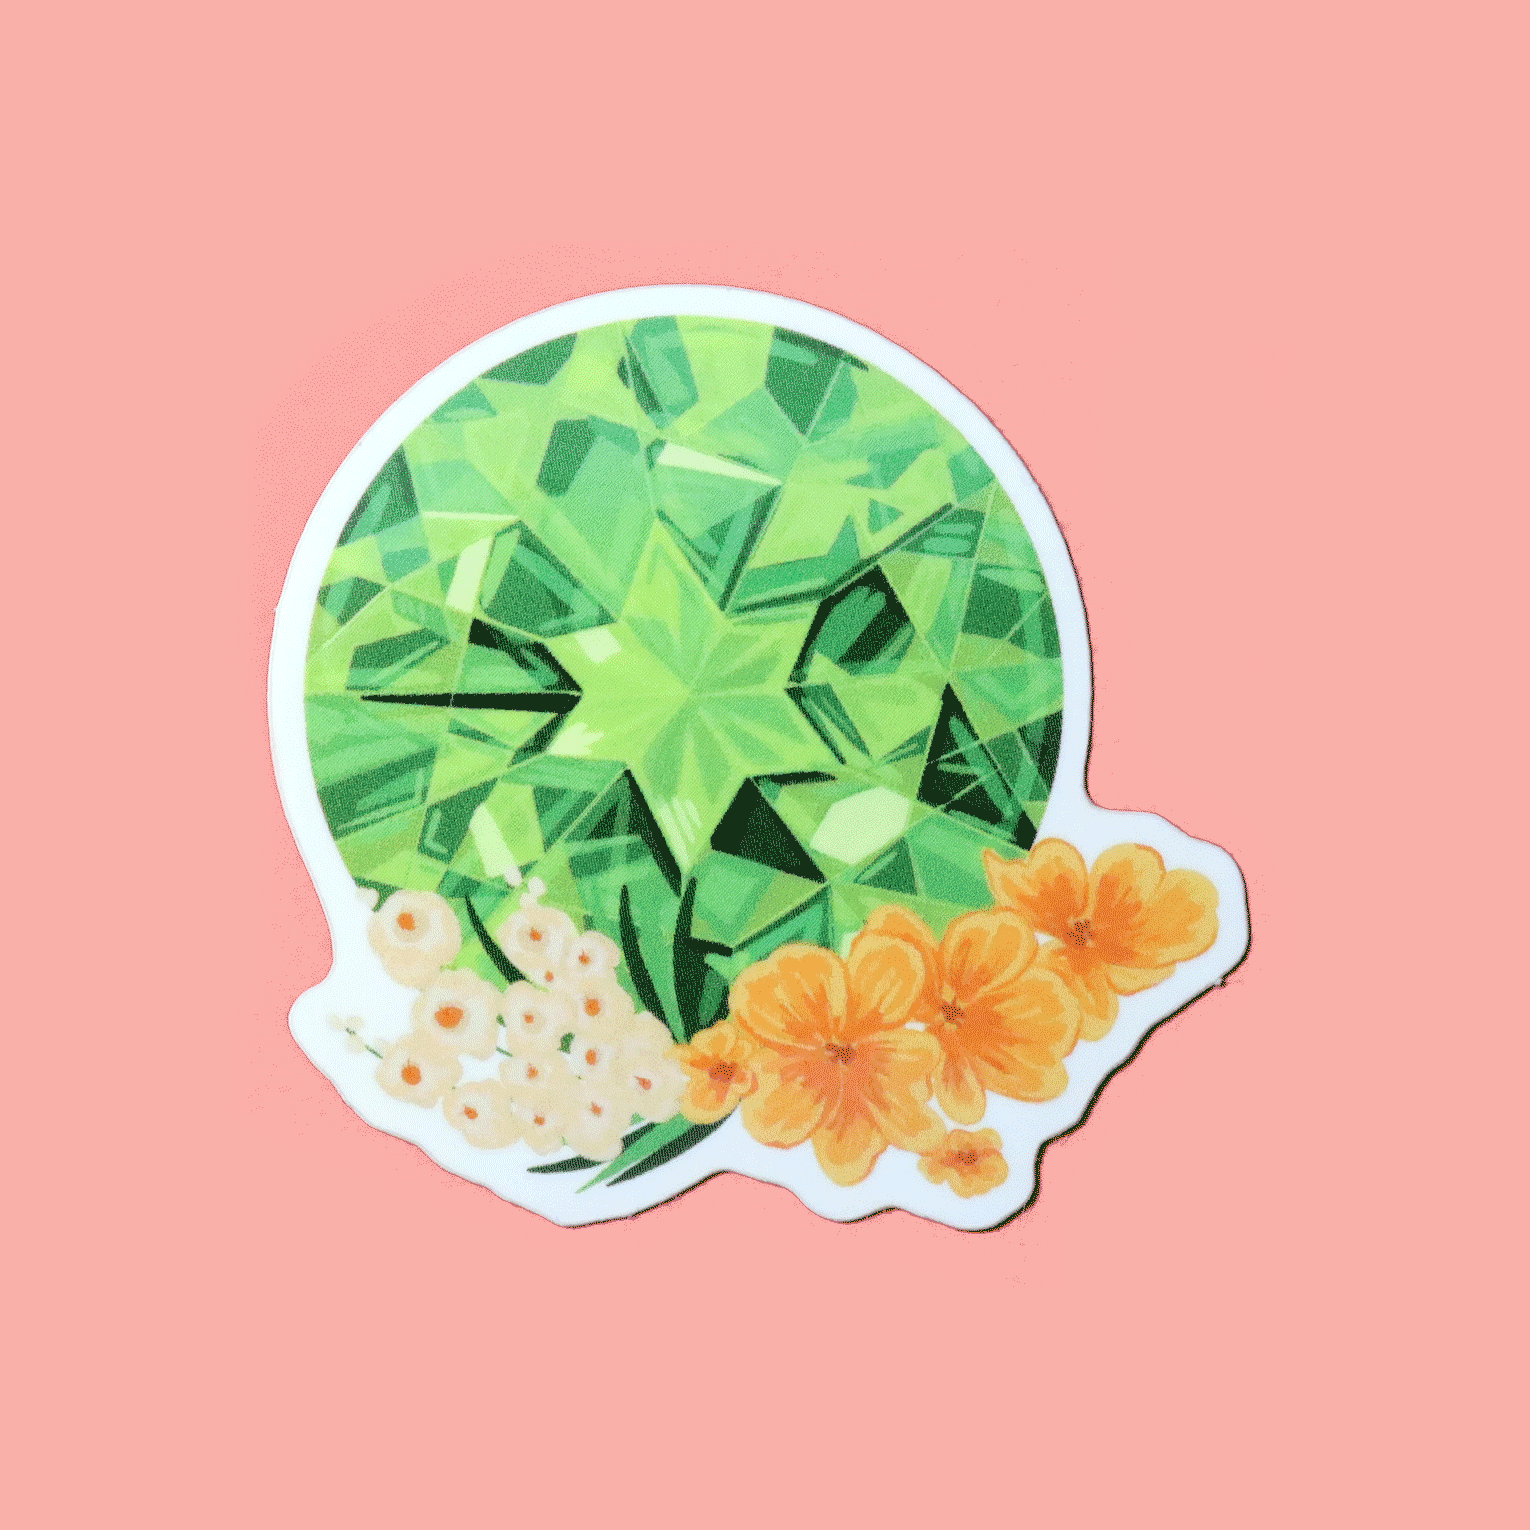 Sticker showcasing an illustrated August birthstone of peridot and birth flowers of gladiolus and poppy.